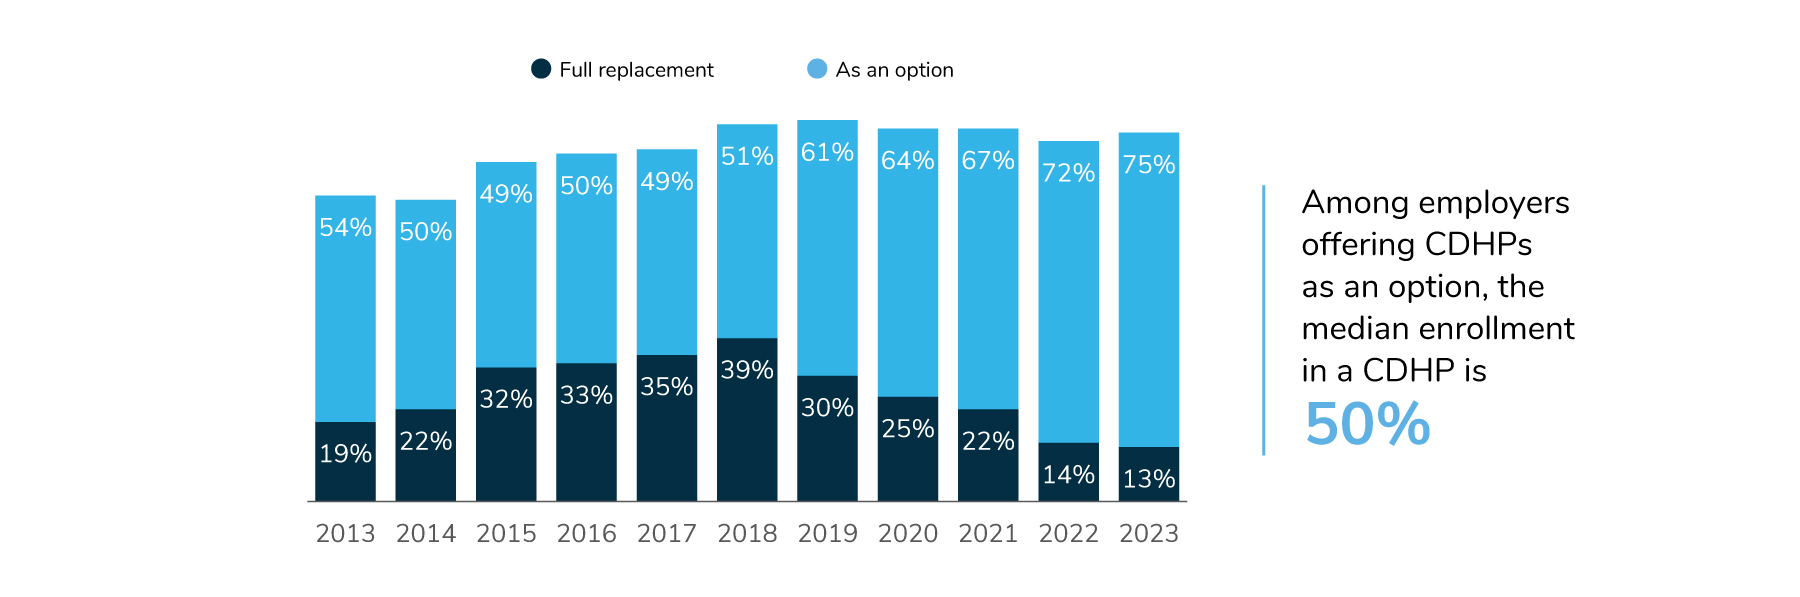 The percentage of employers only offering CDHPs will be 13% in 2023 (a decrease from 14% in 2022). 75% will offer CDHPs as an option (up from 72% in 2022).